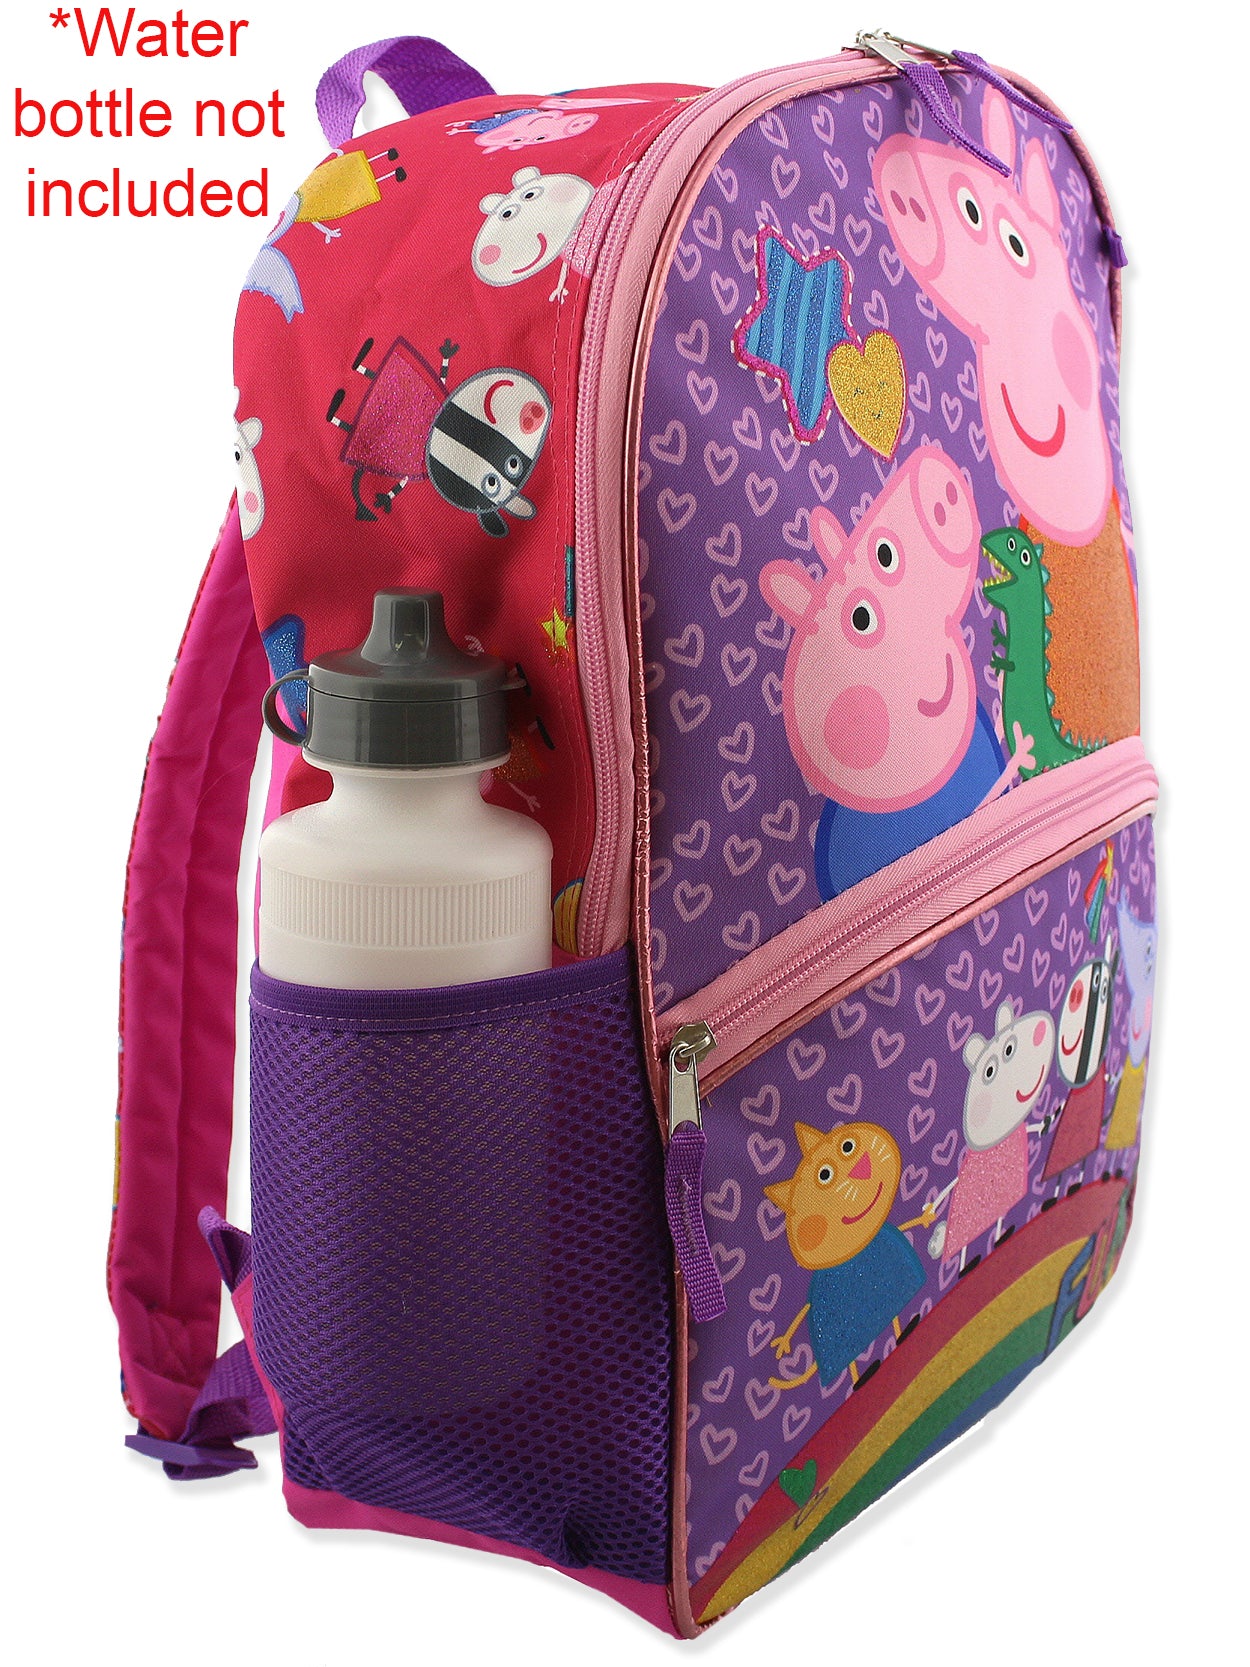 Buy Peppa Pig Preschool Medium 12' Backpack & Lunch Box Set Online at Low  Prices in India - Amazon.in